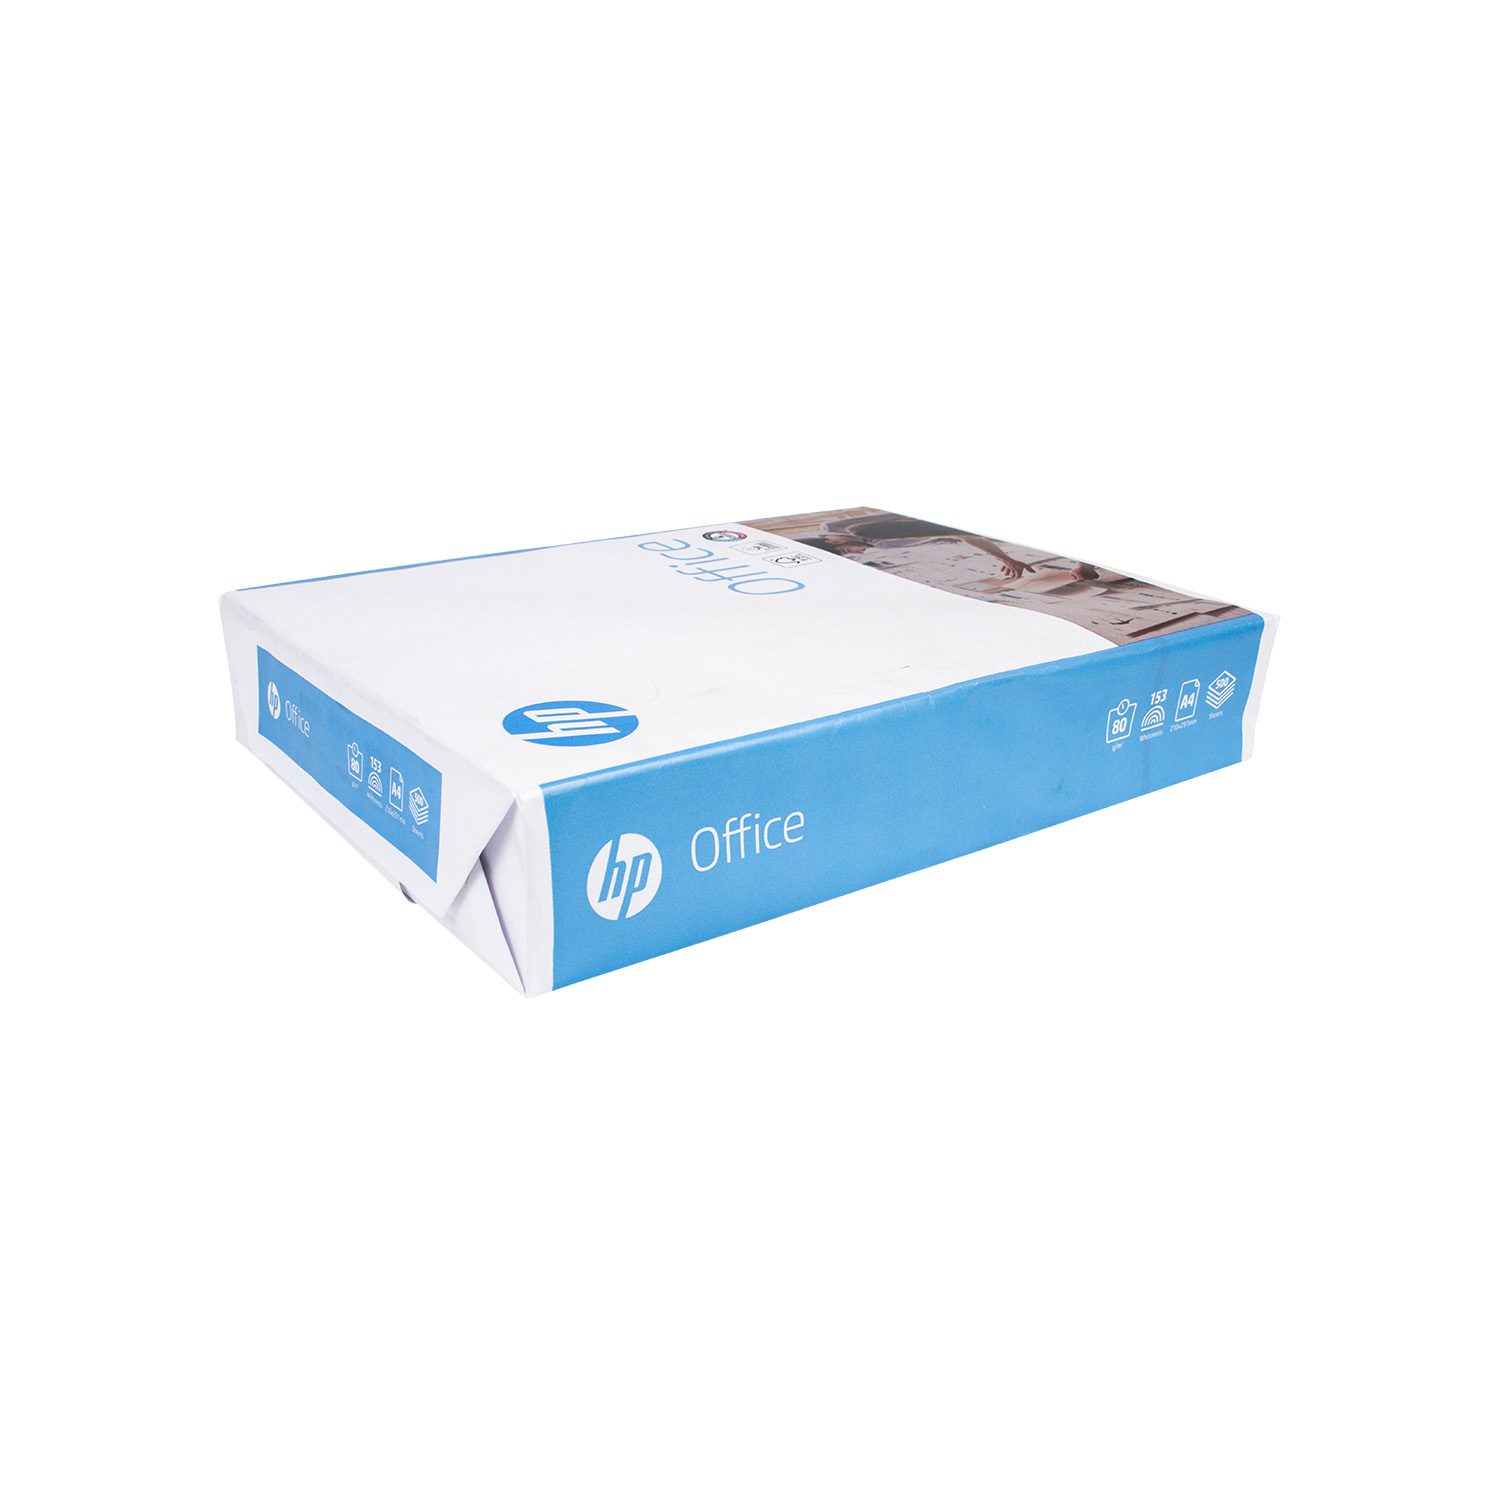 HP A4 Office Paper (Ream) - Office Supplies - Office Paper - Paper